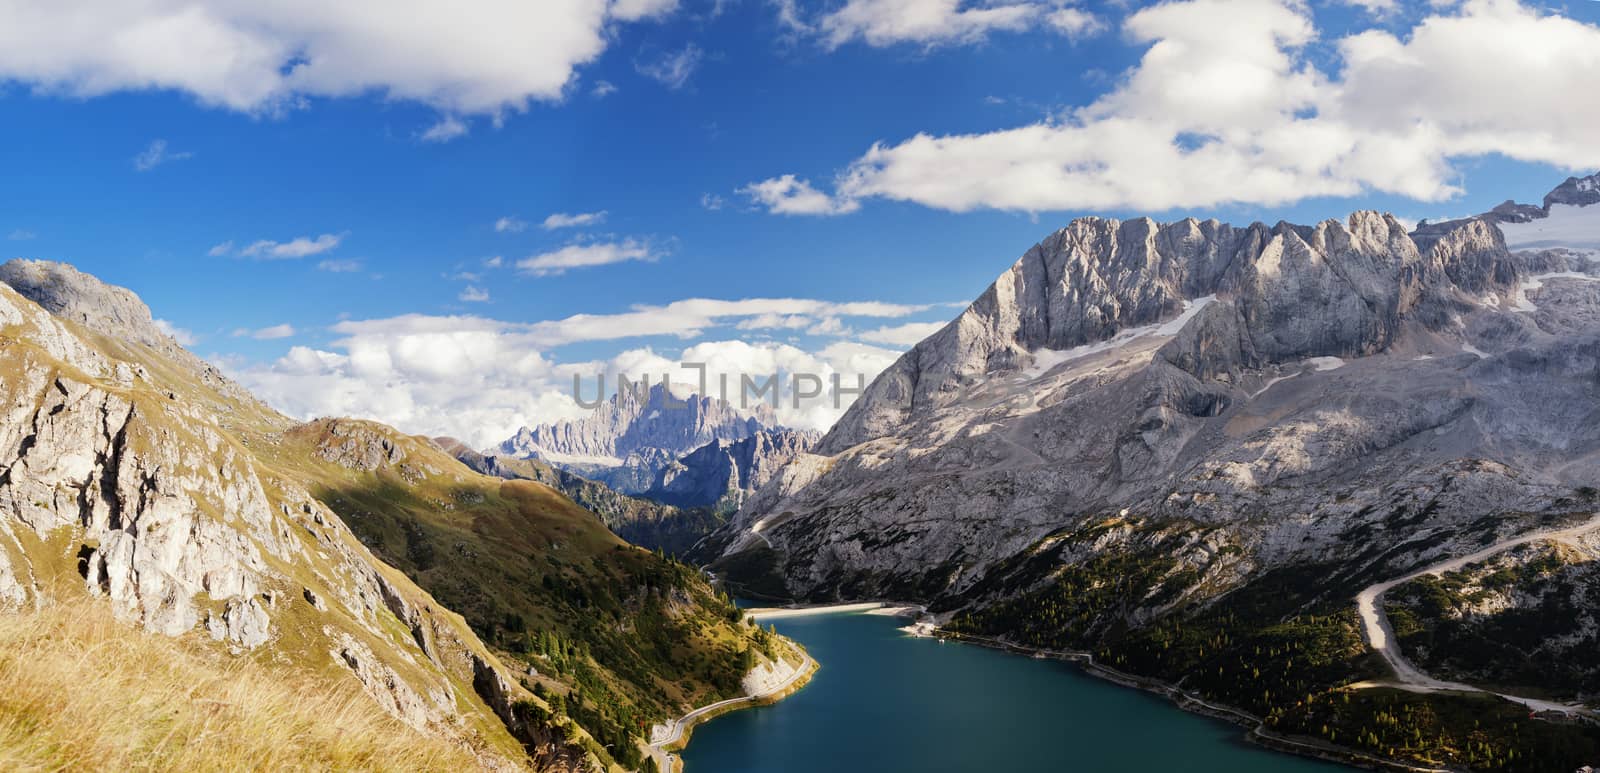 Fedaia lake in Dolomites by Goodday